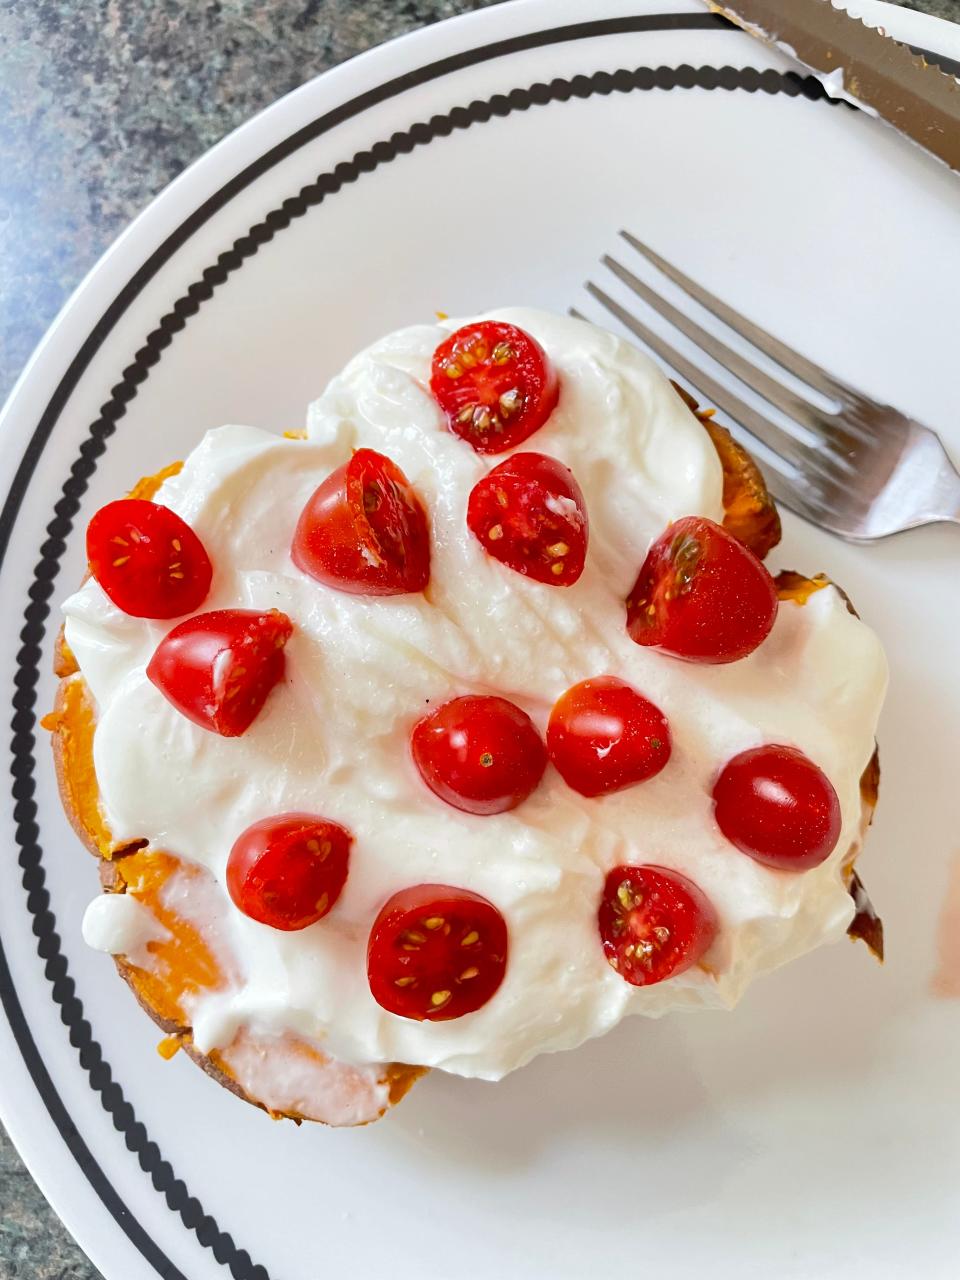 Baked potatoes topped with Greek yogurt and cherry tomatoes are an easy meal option when you're not that hungry.